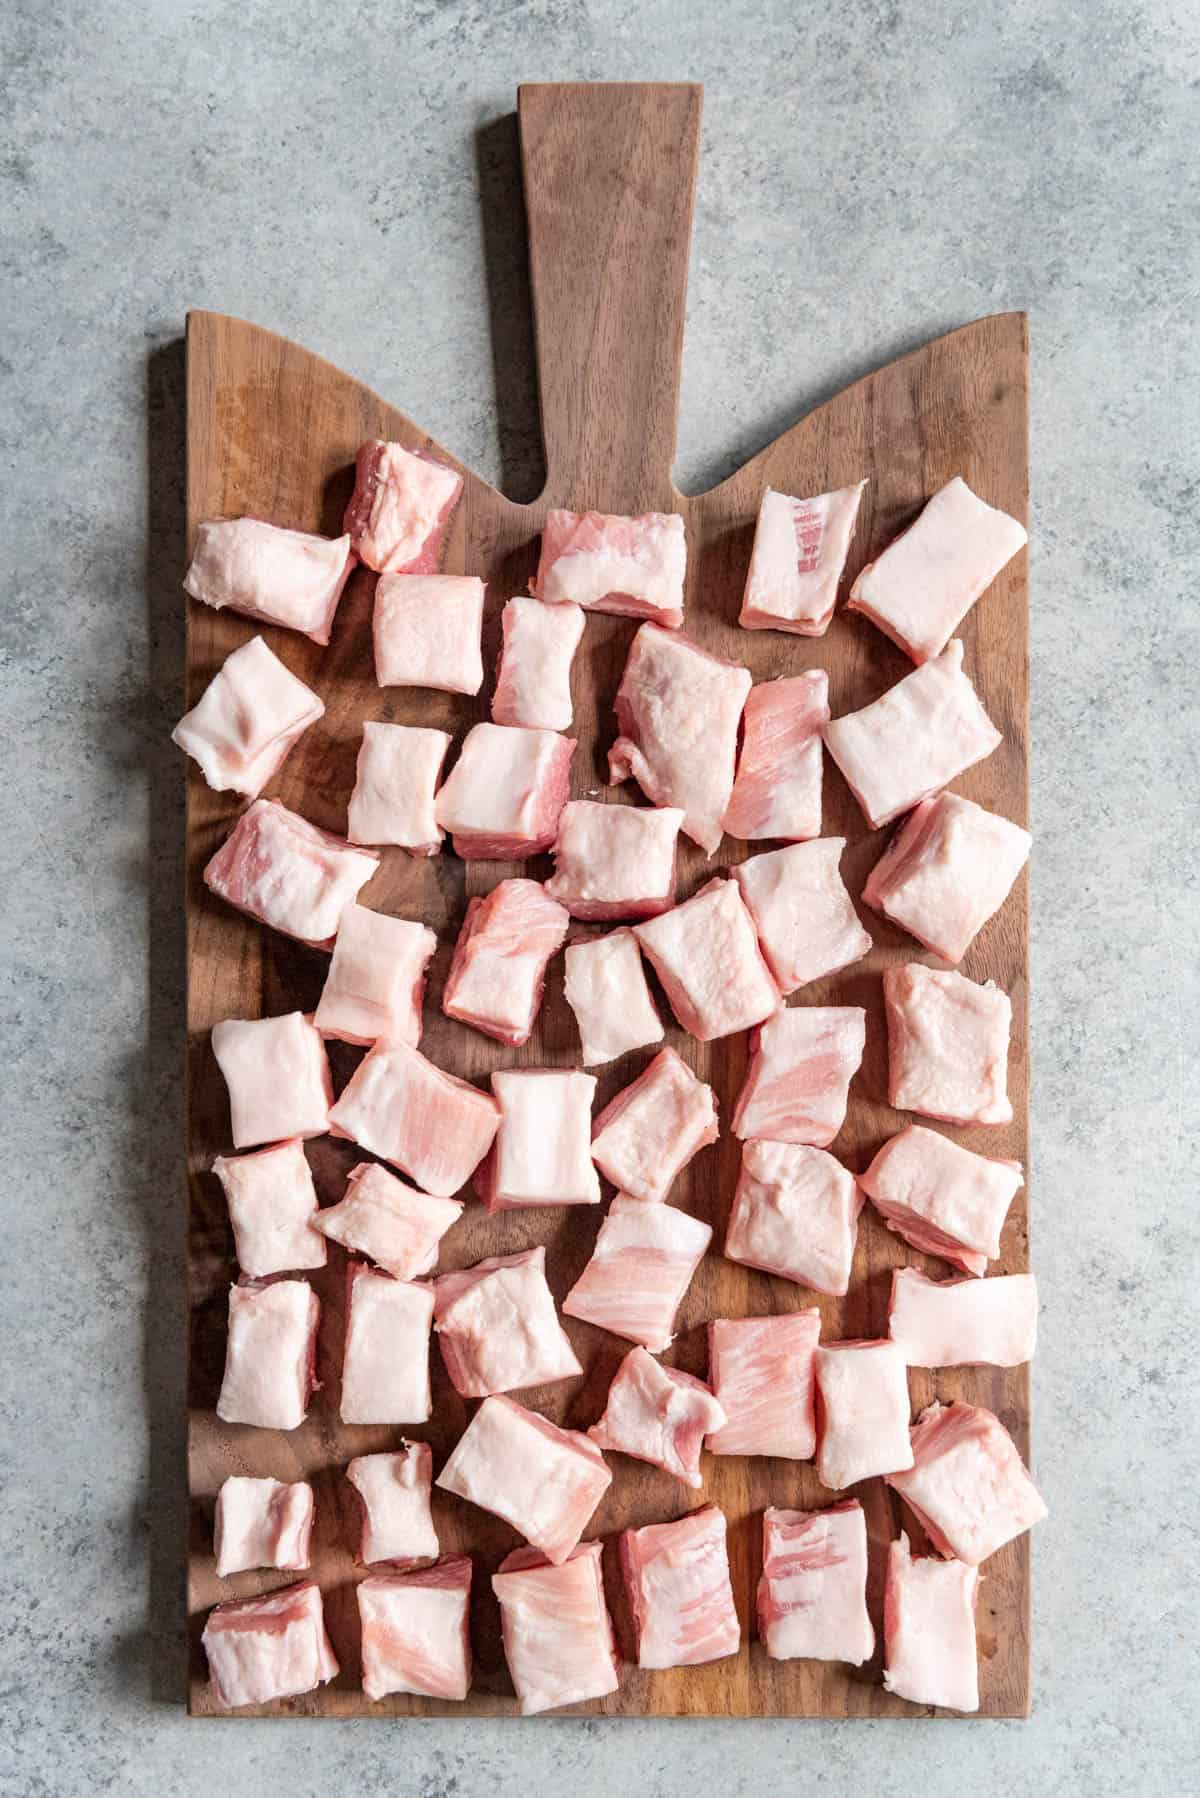 An image of cubes of pork belly on a cutting board.